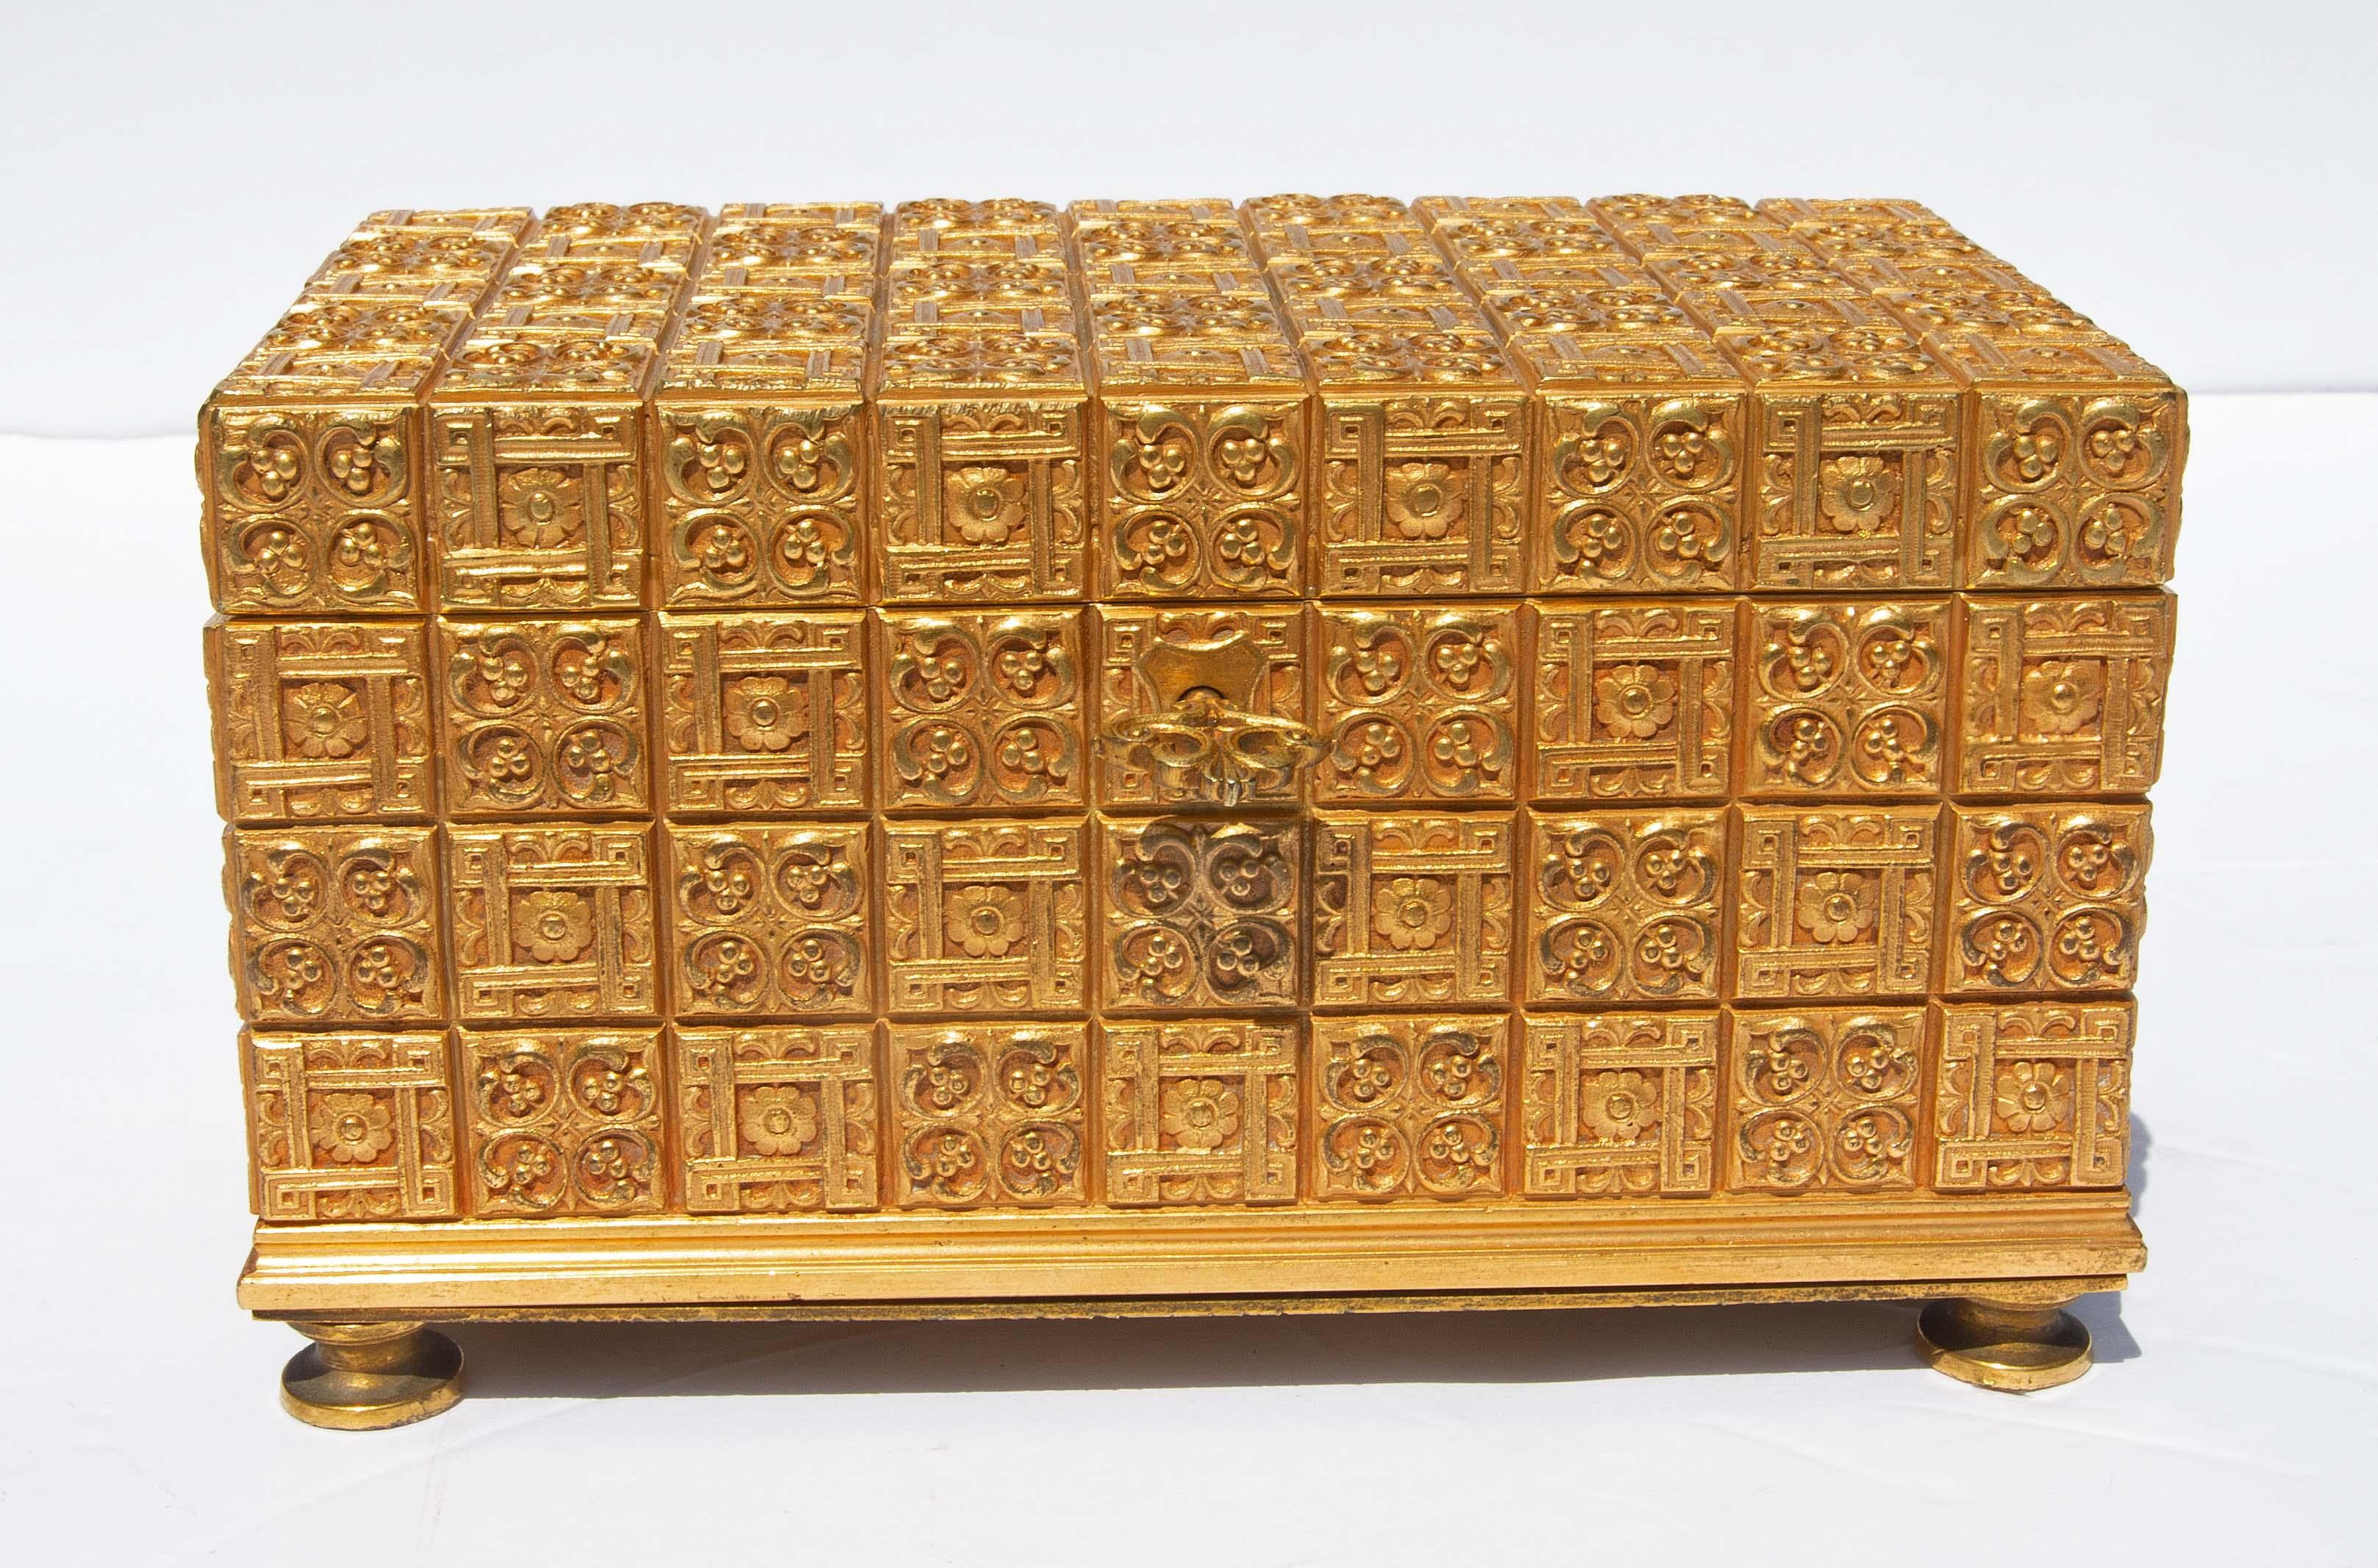 Rare Tiffany Studios gilt bronze jewelry box. The finest Tiffany gilding in Venetian gold tone. A rare pattern. After an exhaustive search I was able to find only one other example of this pattern. It was a signed box sold by Heritage Auction in